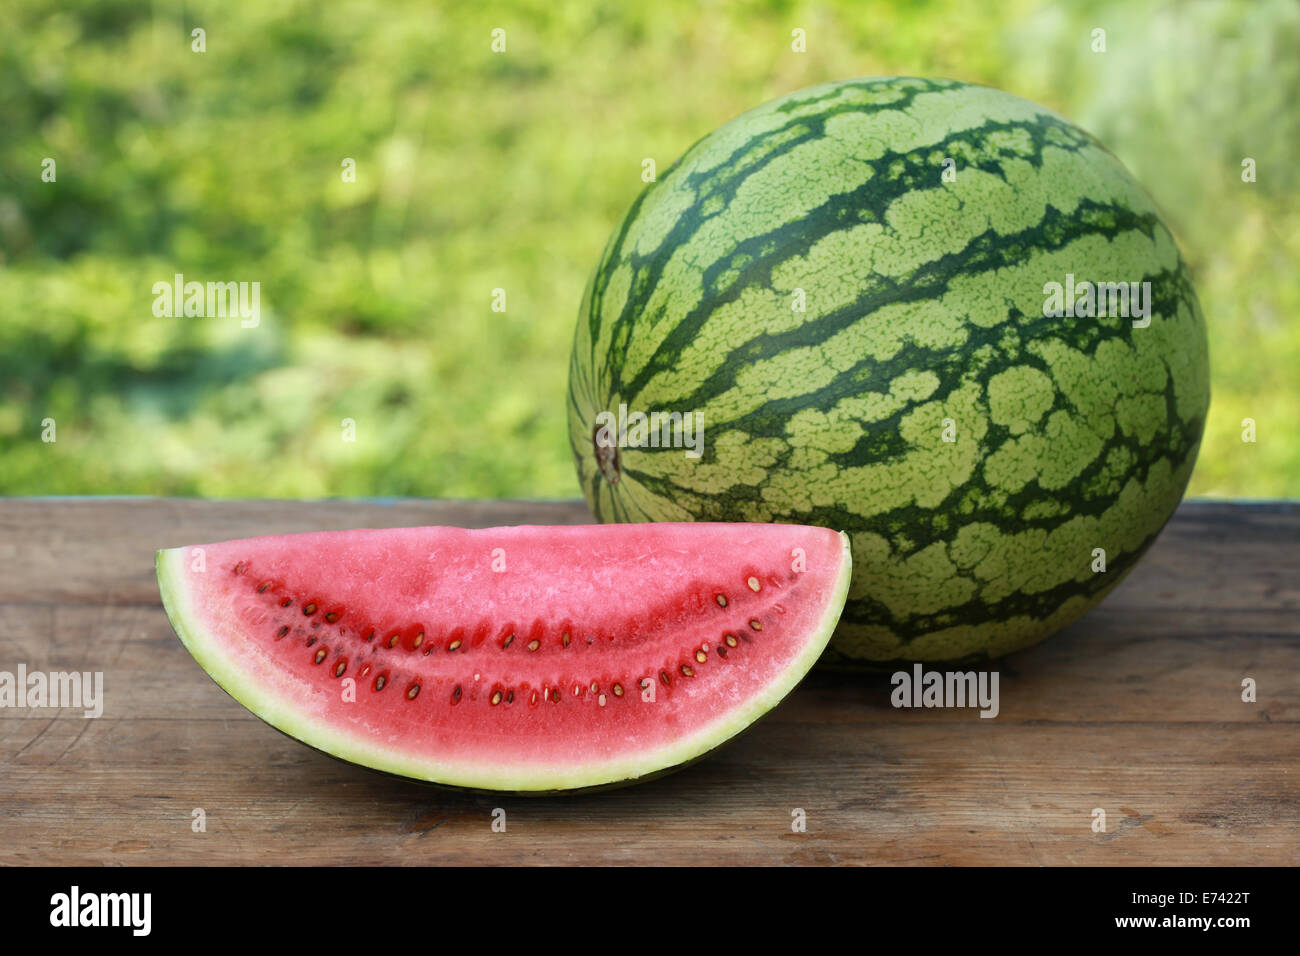 Slice of a watermelon and a whole one on a wooden table Stock Photo